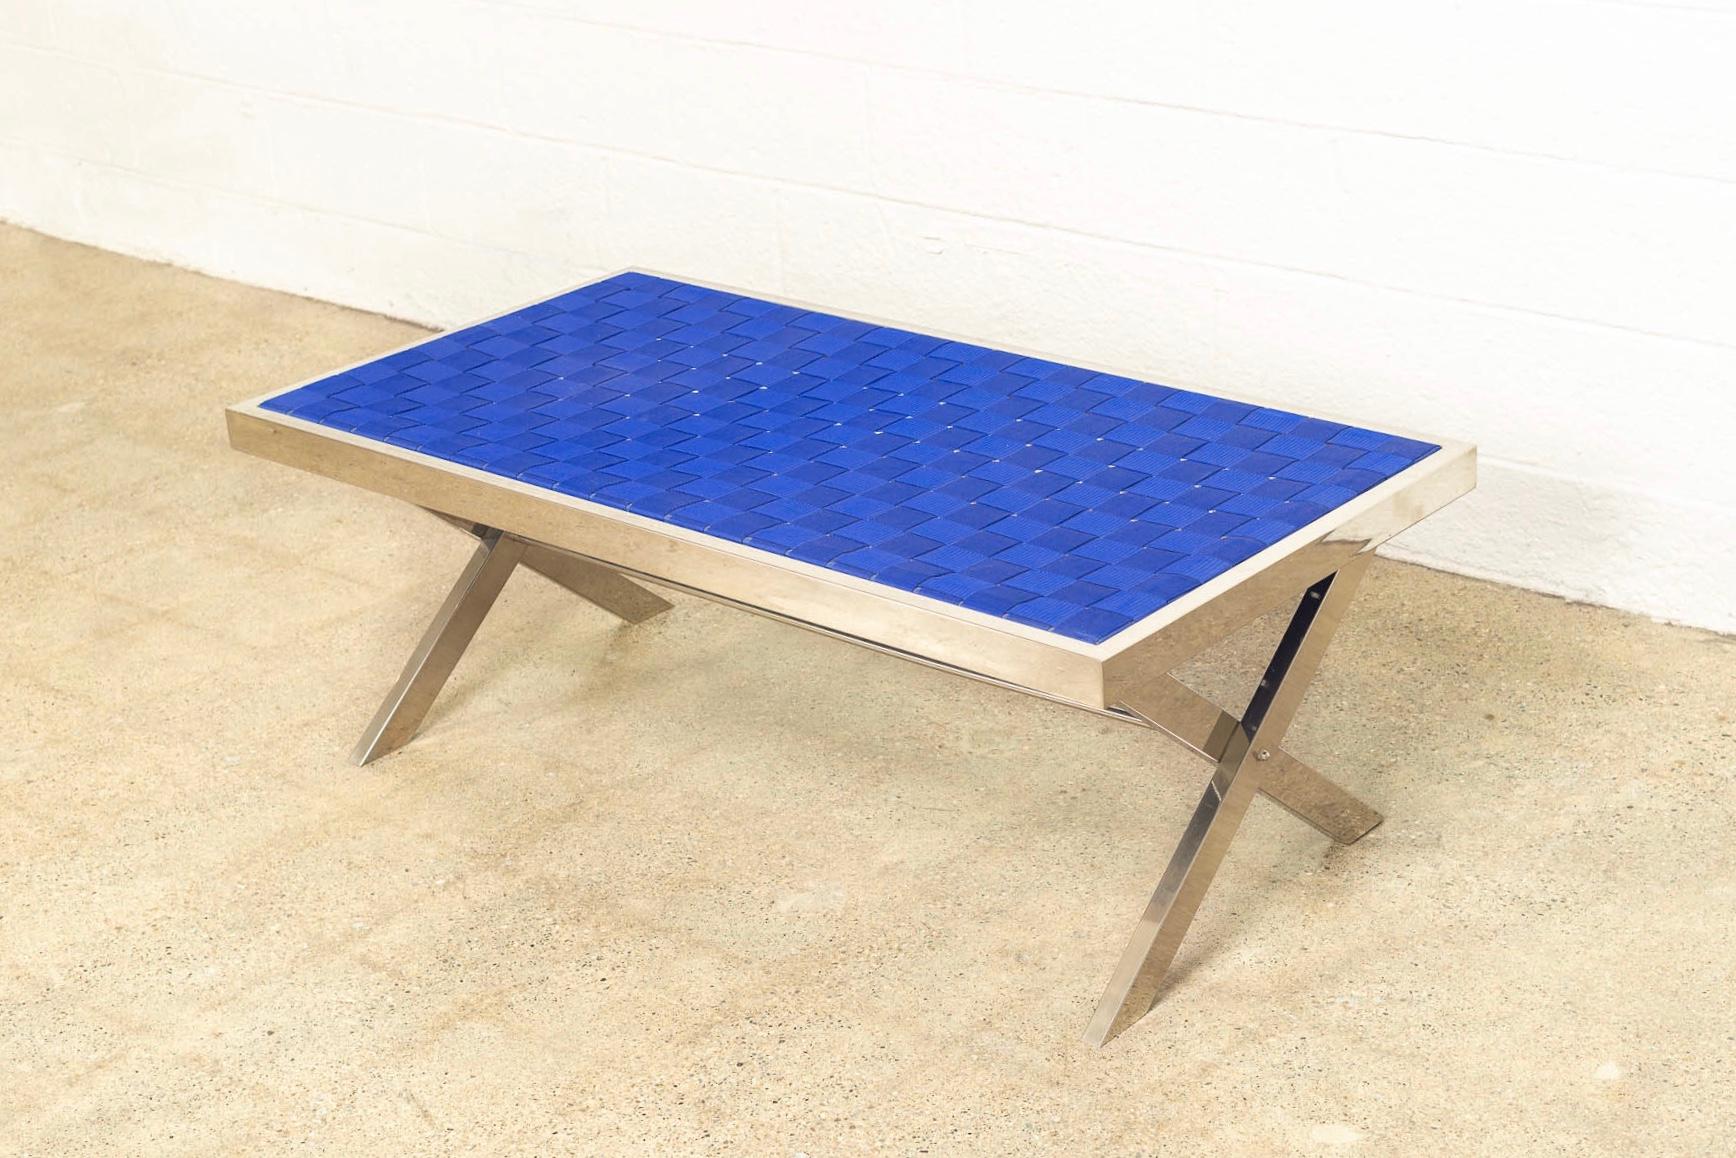 This vintage Mid-Century Modern Milo Baughman style chrome and strap bench is circa 1980. The clean, minimalist design features a chrome frame with crossed x-base and a woven heavy strap seat in a striking shade of royal blue. Use as a seat bench or